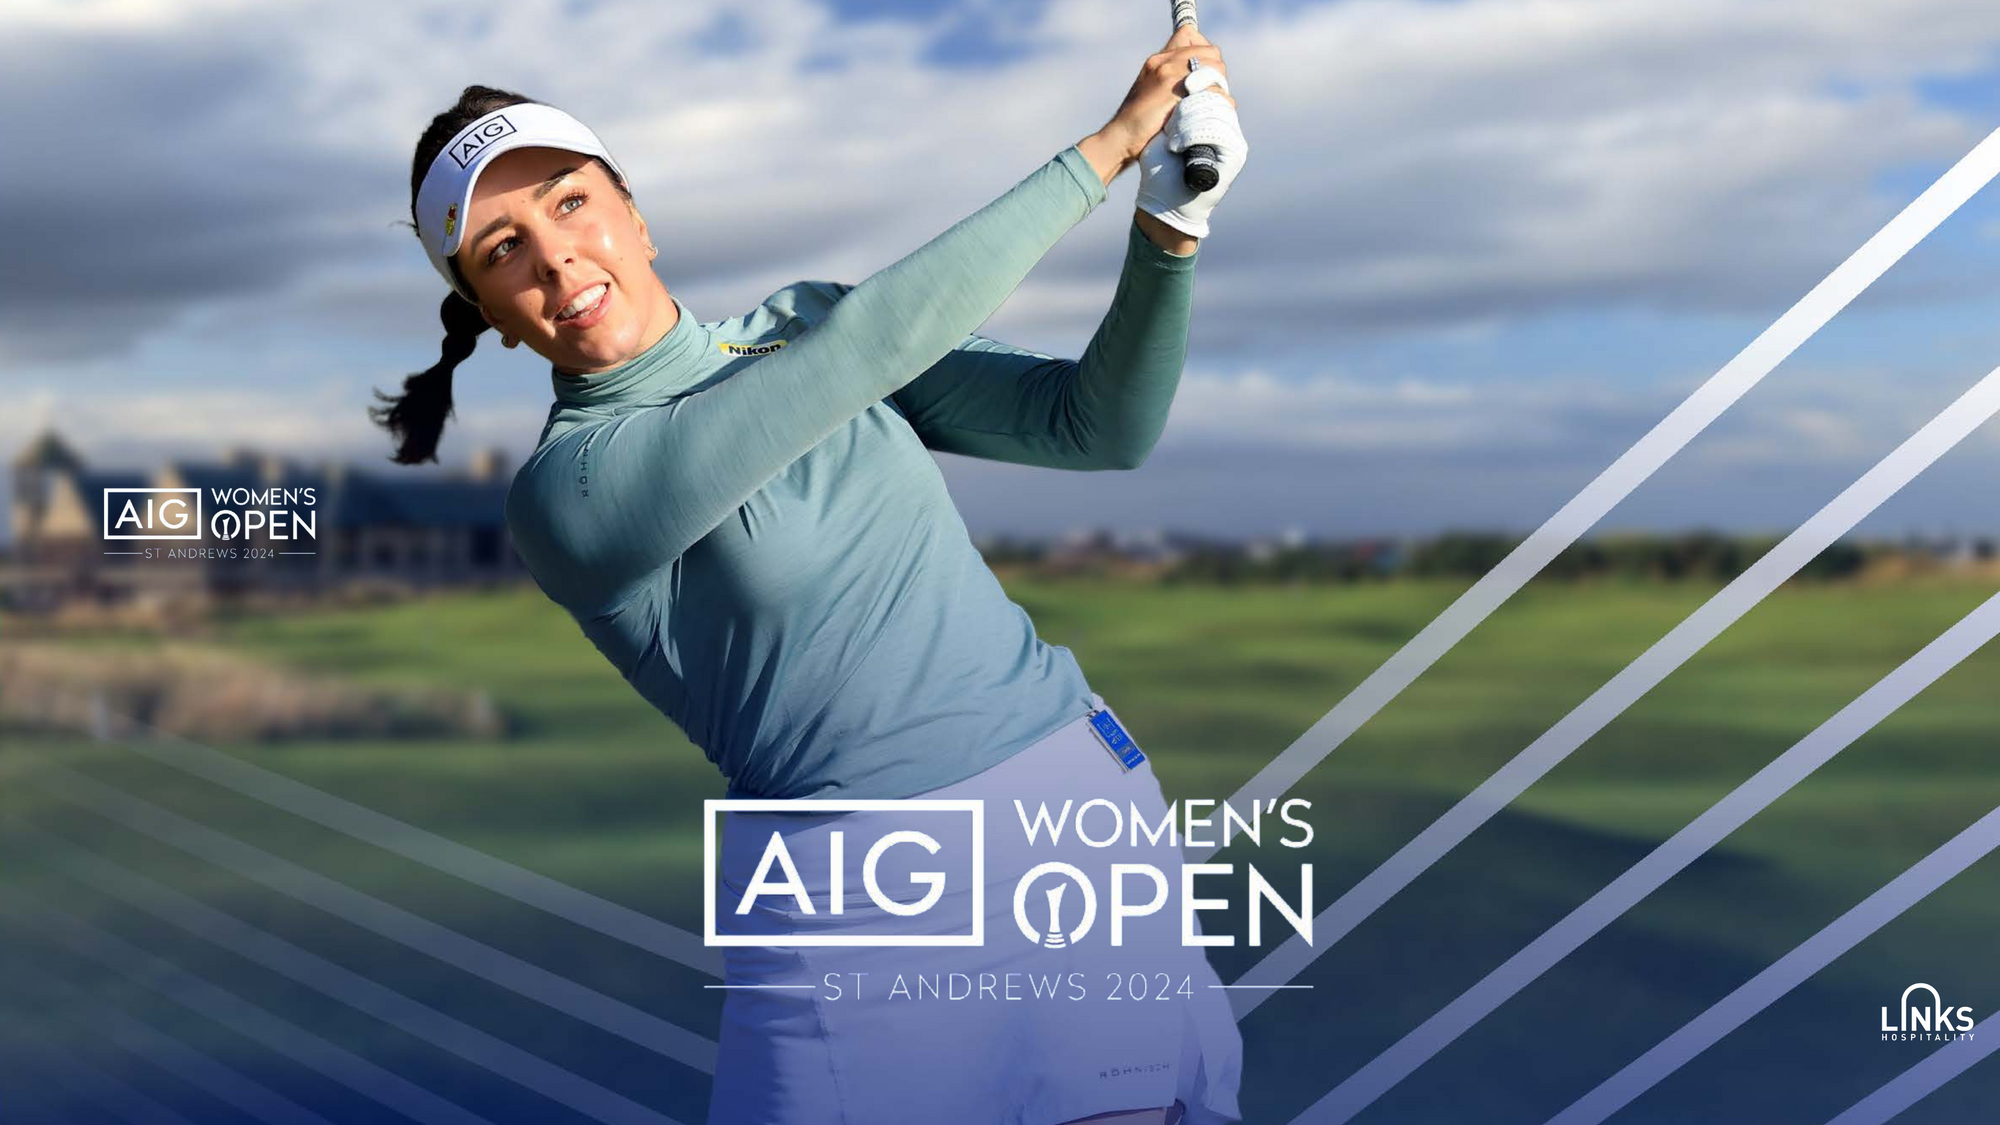 The Women's Open at St. Andrews: A Preview of Womens Golf's Most Iconic Event.